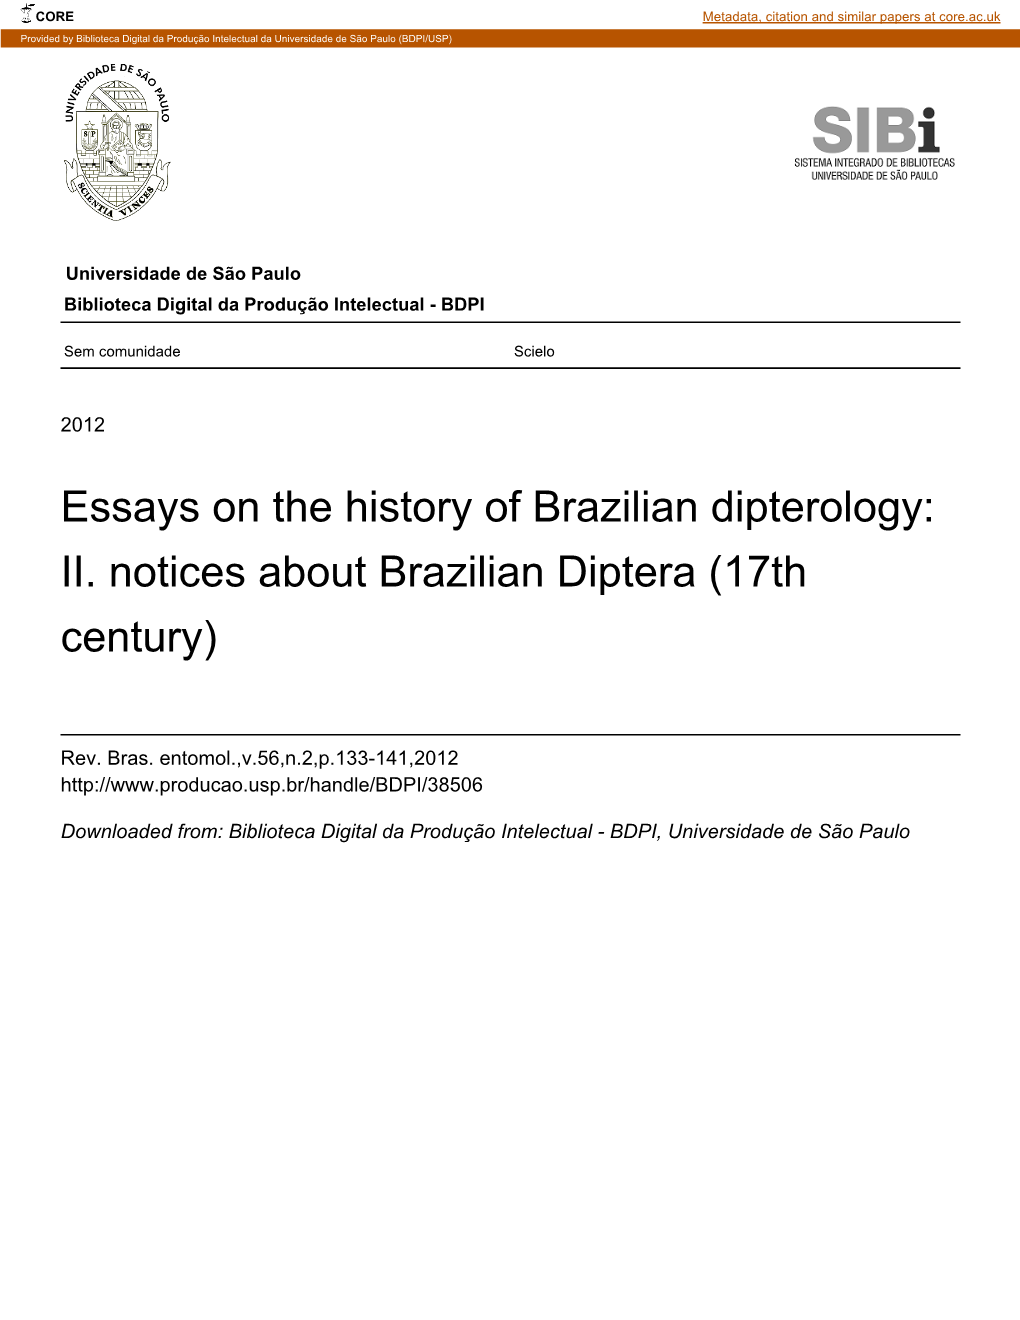 II. Notices About Brazilian Diptera (17Th Century)